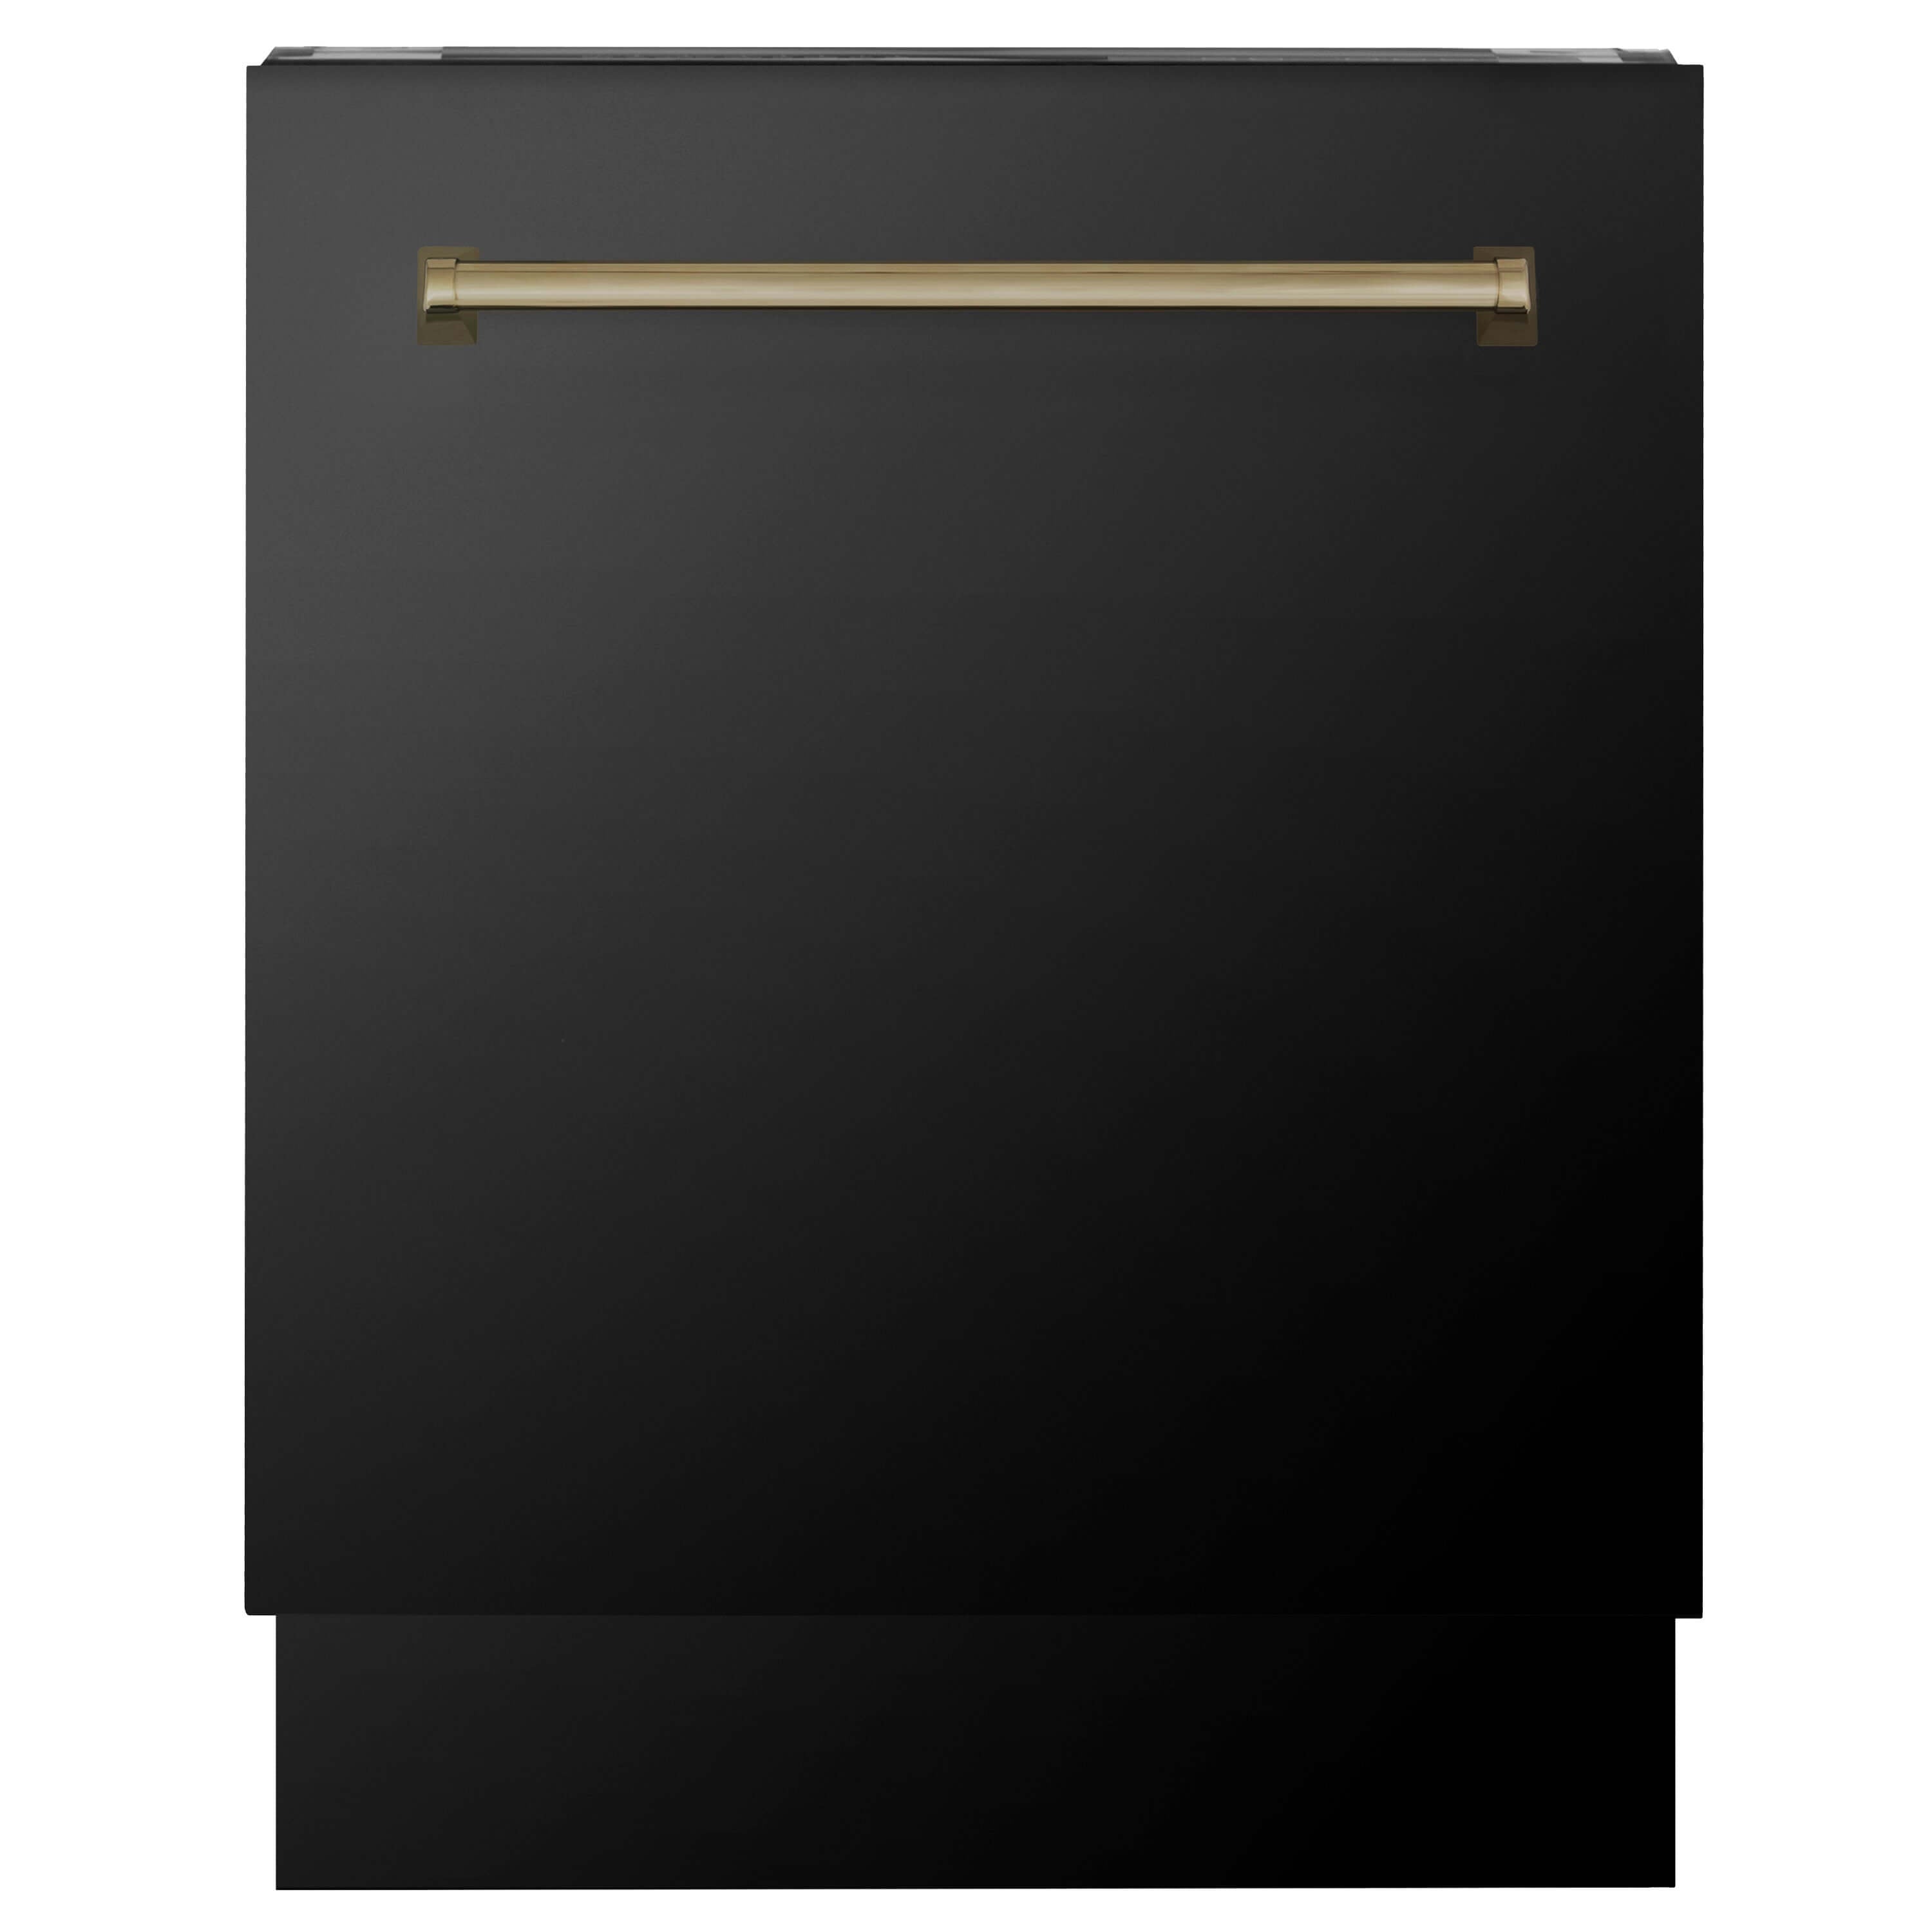 ZLINE 30 in. Autograph Edition Kitchen Package with Black Stainless Steel Dual Fuel Range, Range Hood, Dishwasher and Refrigeration Including External Water Dispenser with Champagne Bronze Accents (4AKPR-RABRHDWV30-CB)